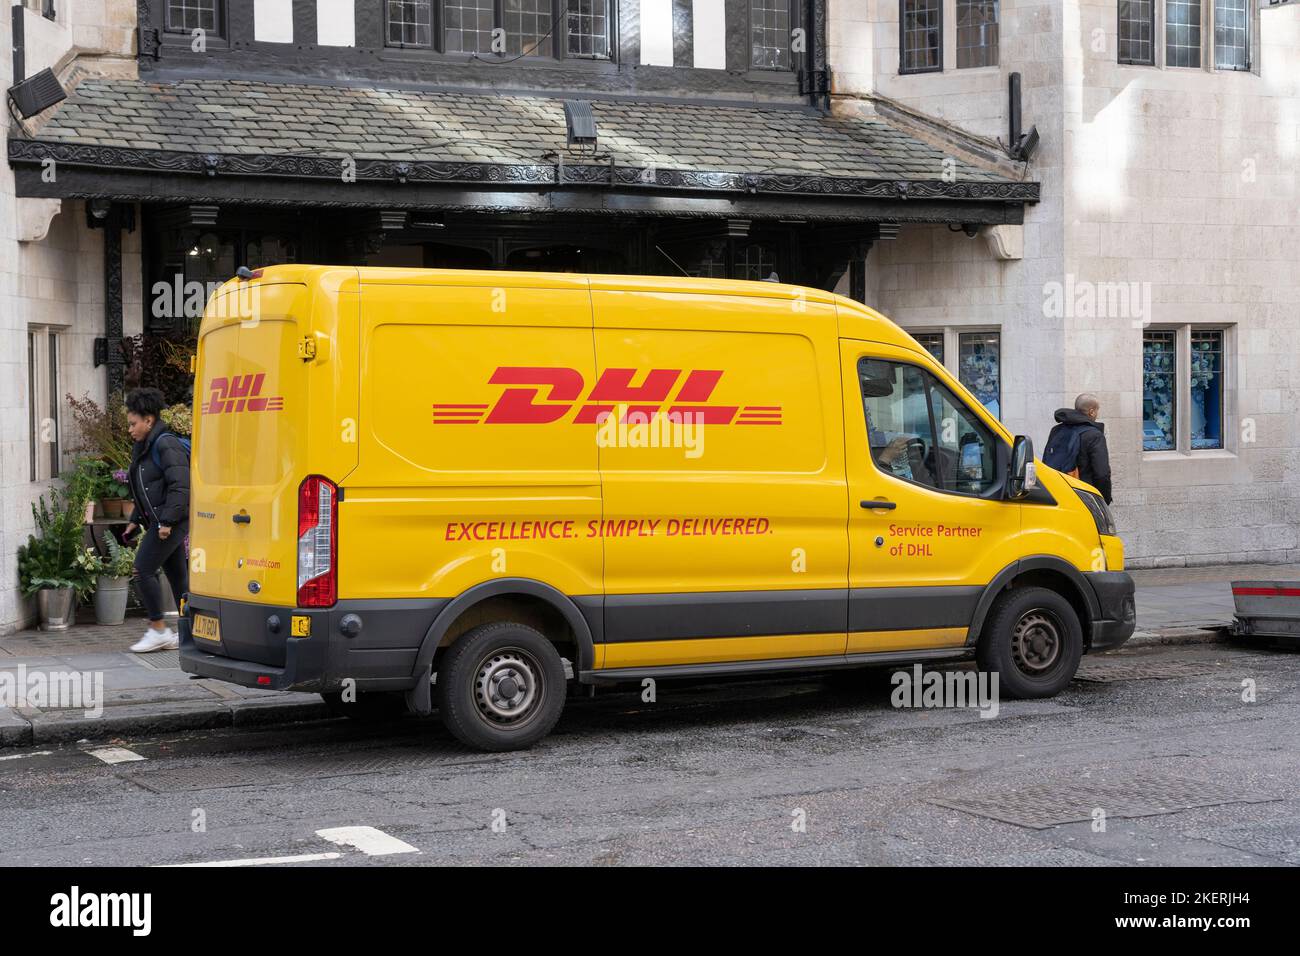 DHL delivery van in London. DHL is a German logistics company providing courier, package delivery and express mail service, part of Deutsche Post Stock Photo